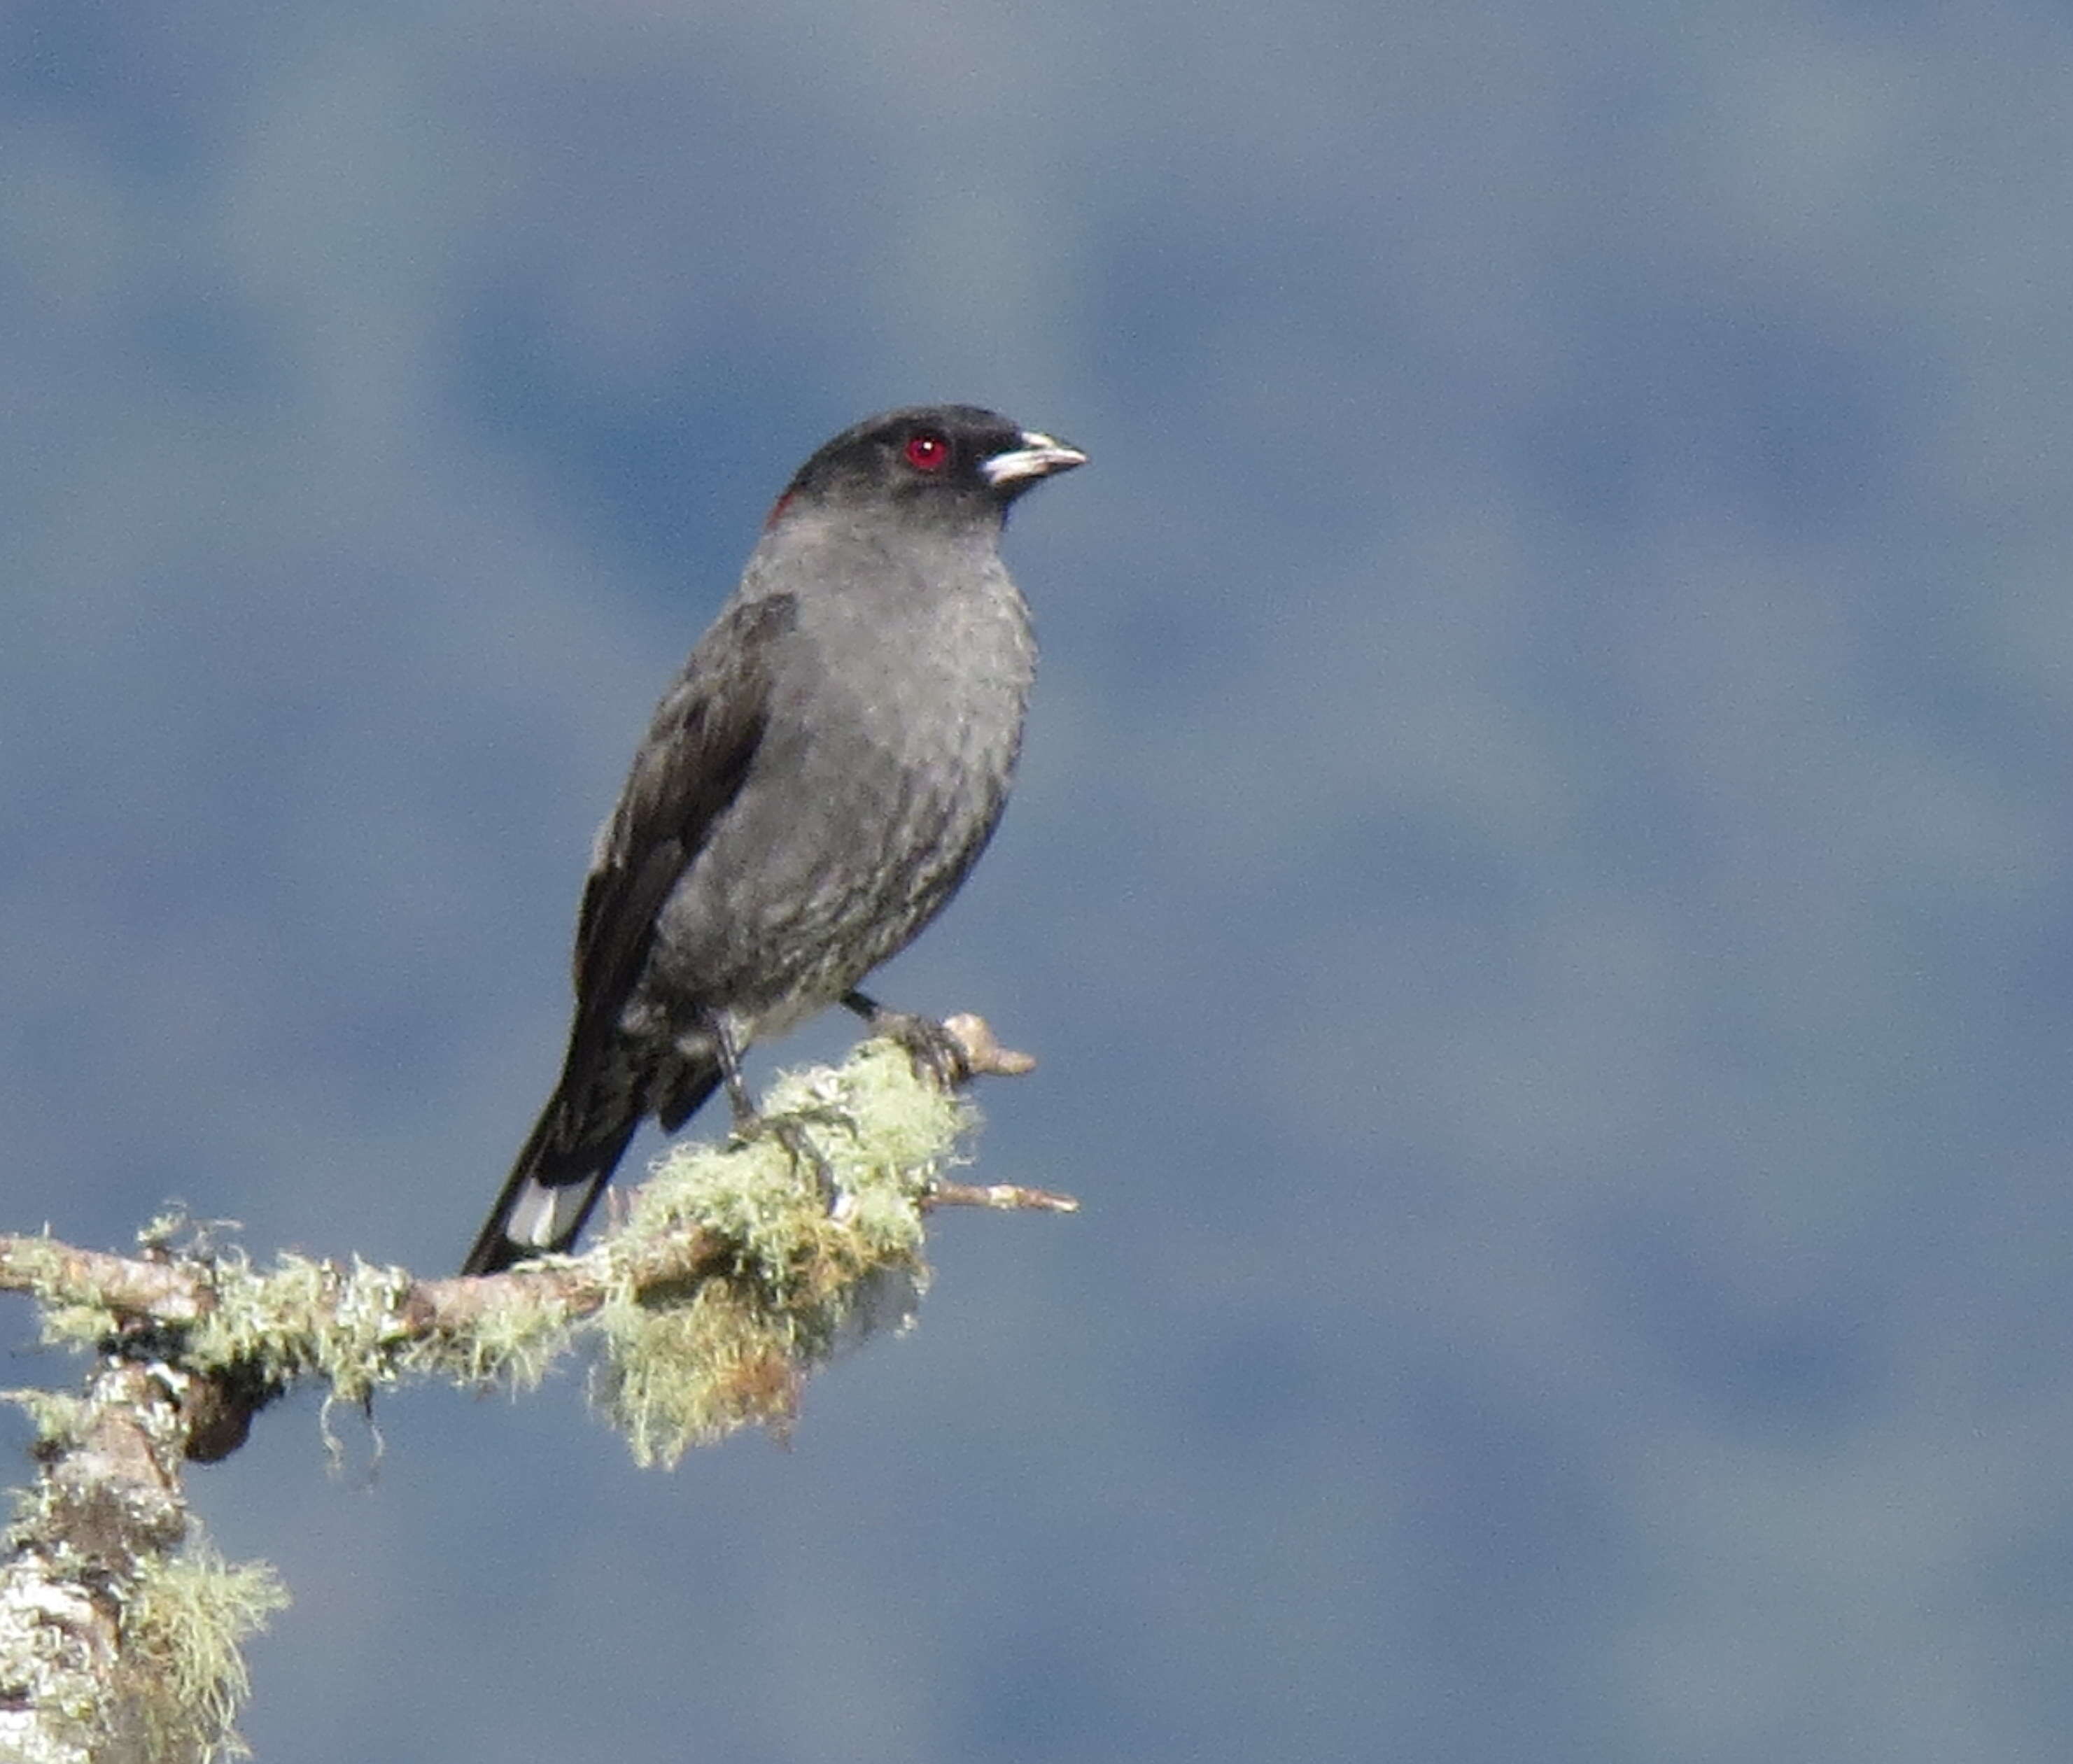 Image of Crested Cotingas